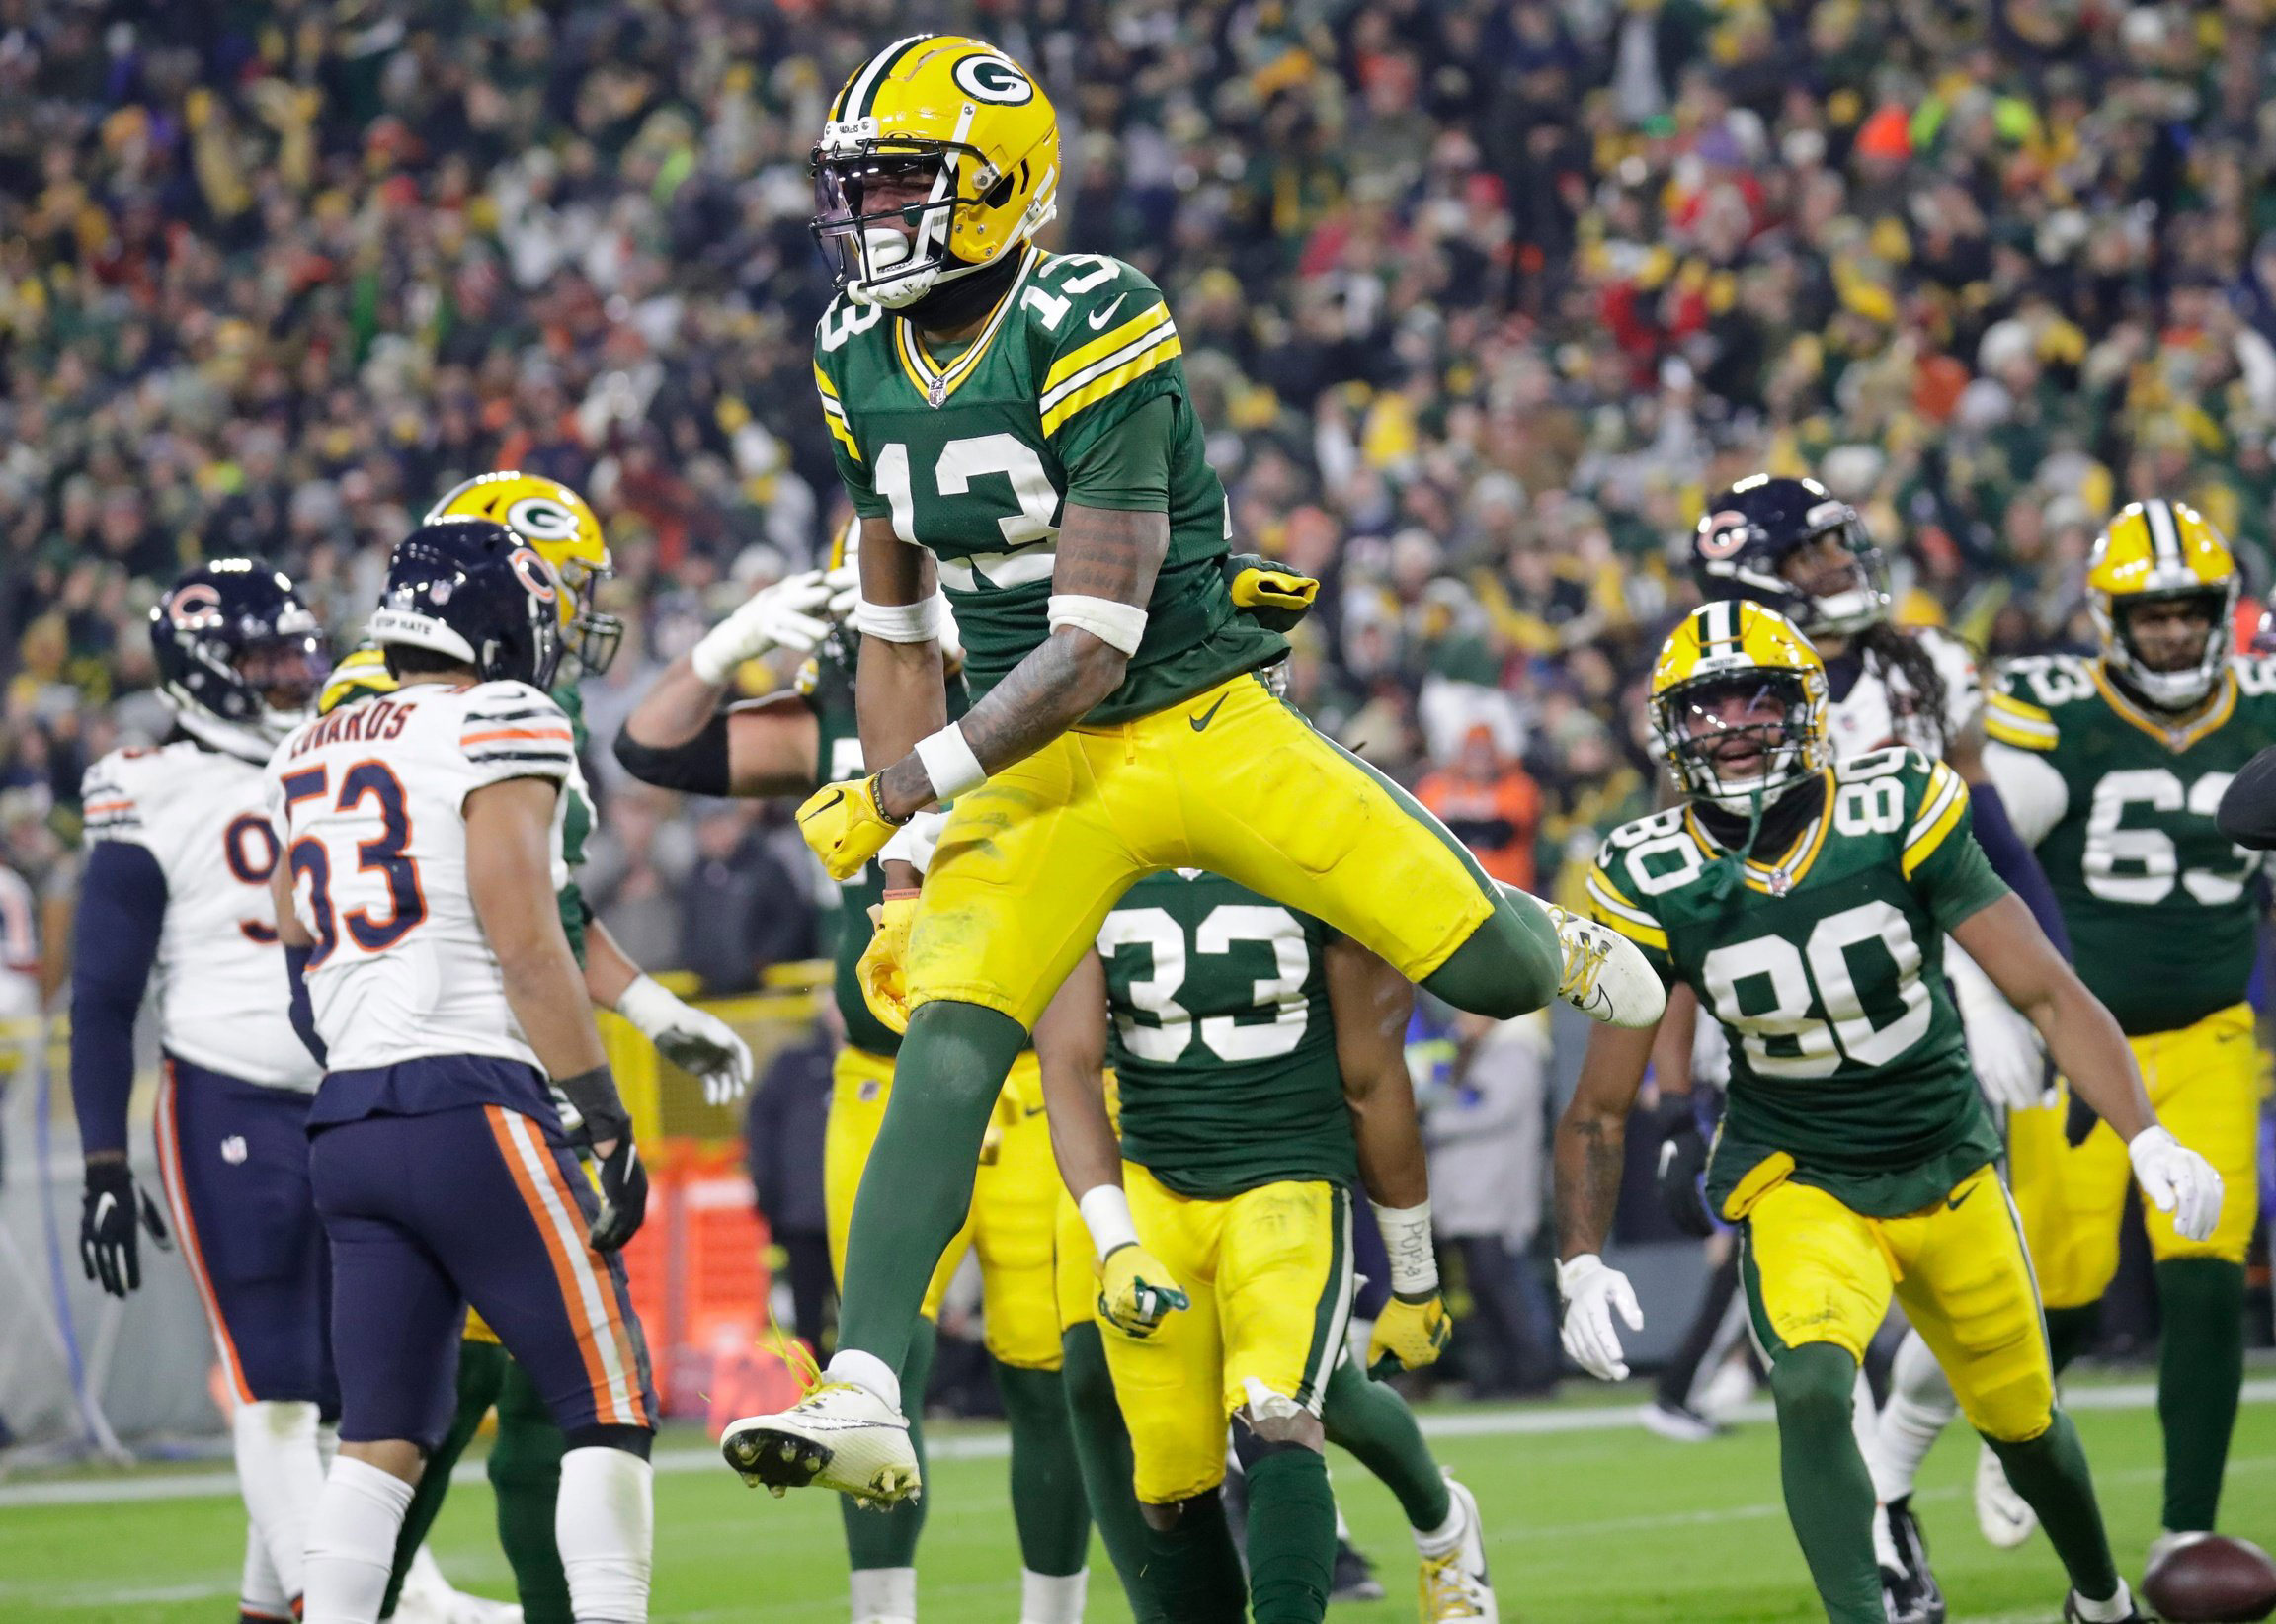 Who Will the Packers Play Next? Potential Opponents and Scenarios in